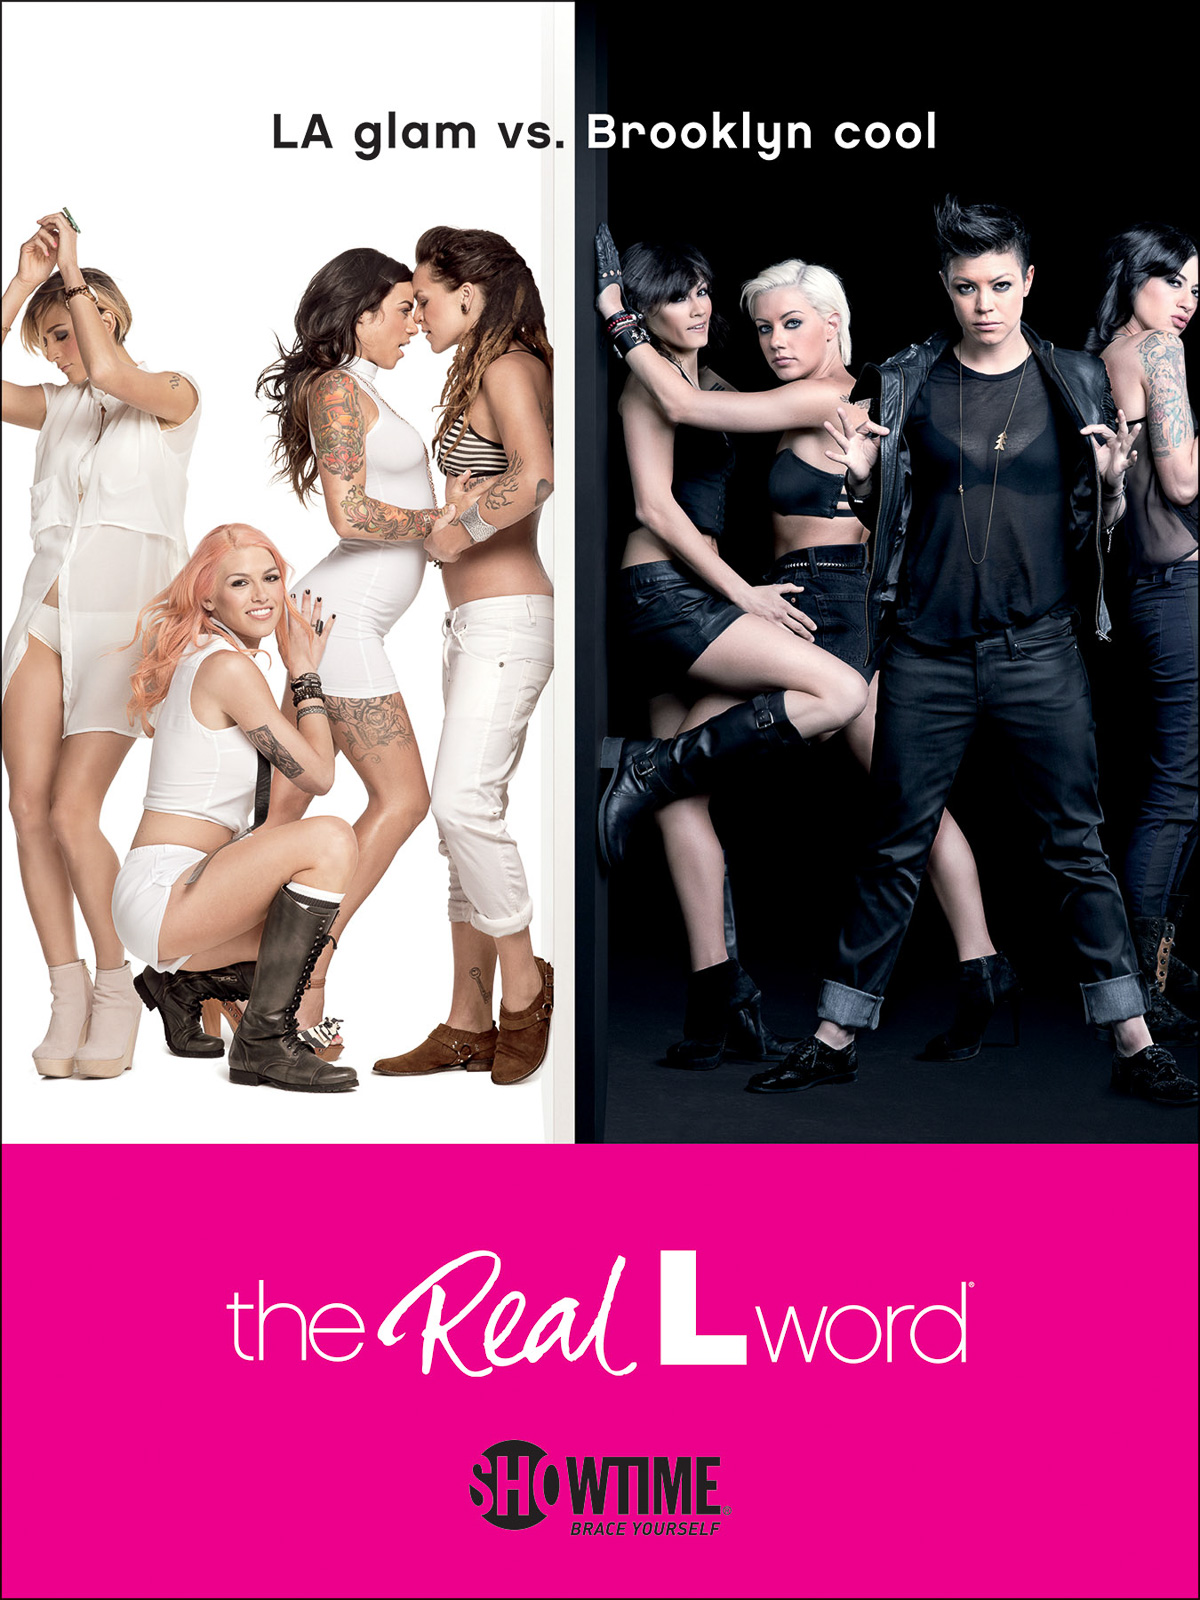 The Real L Word 2010-2012 Showtime